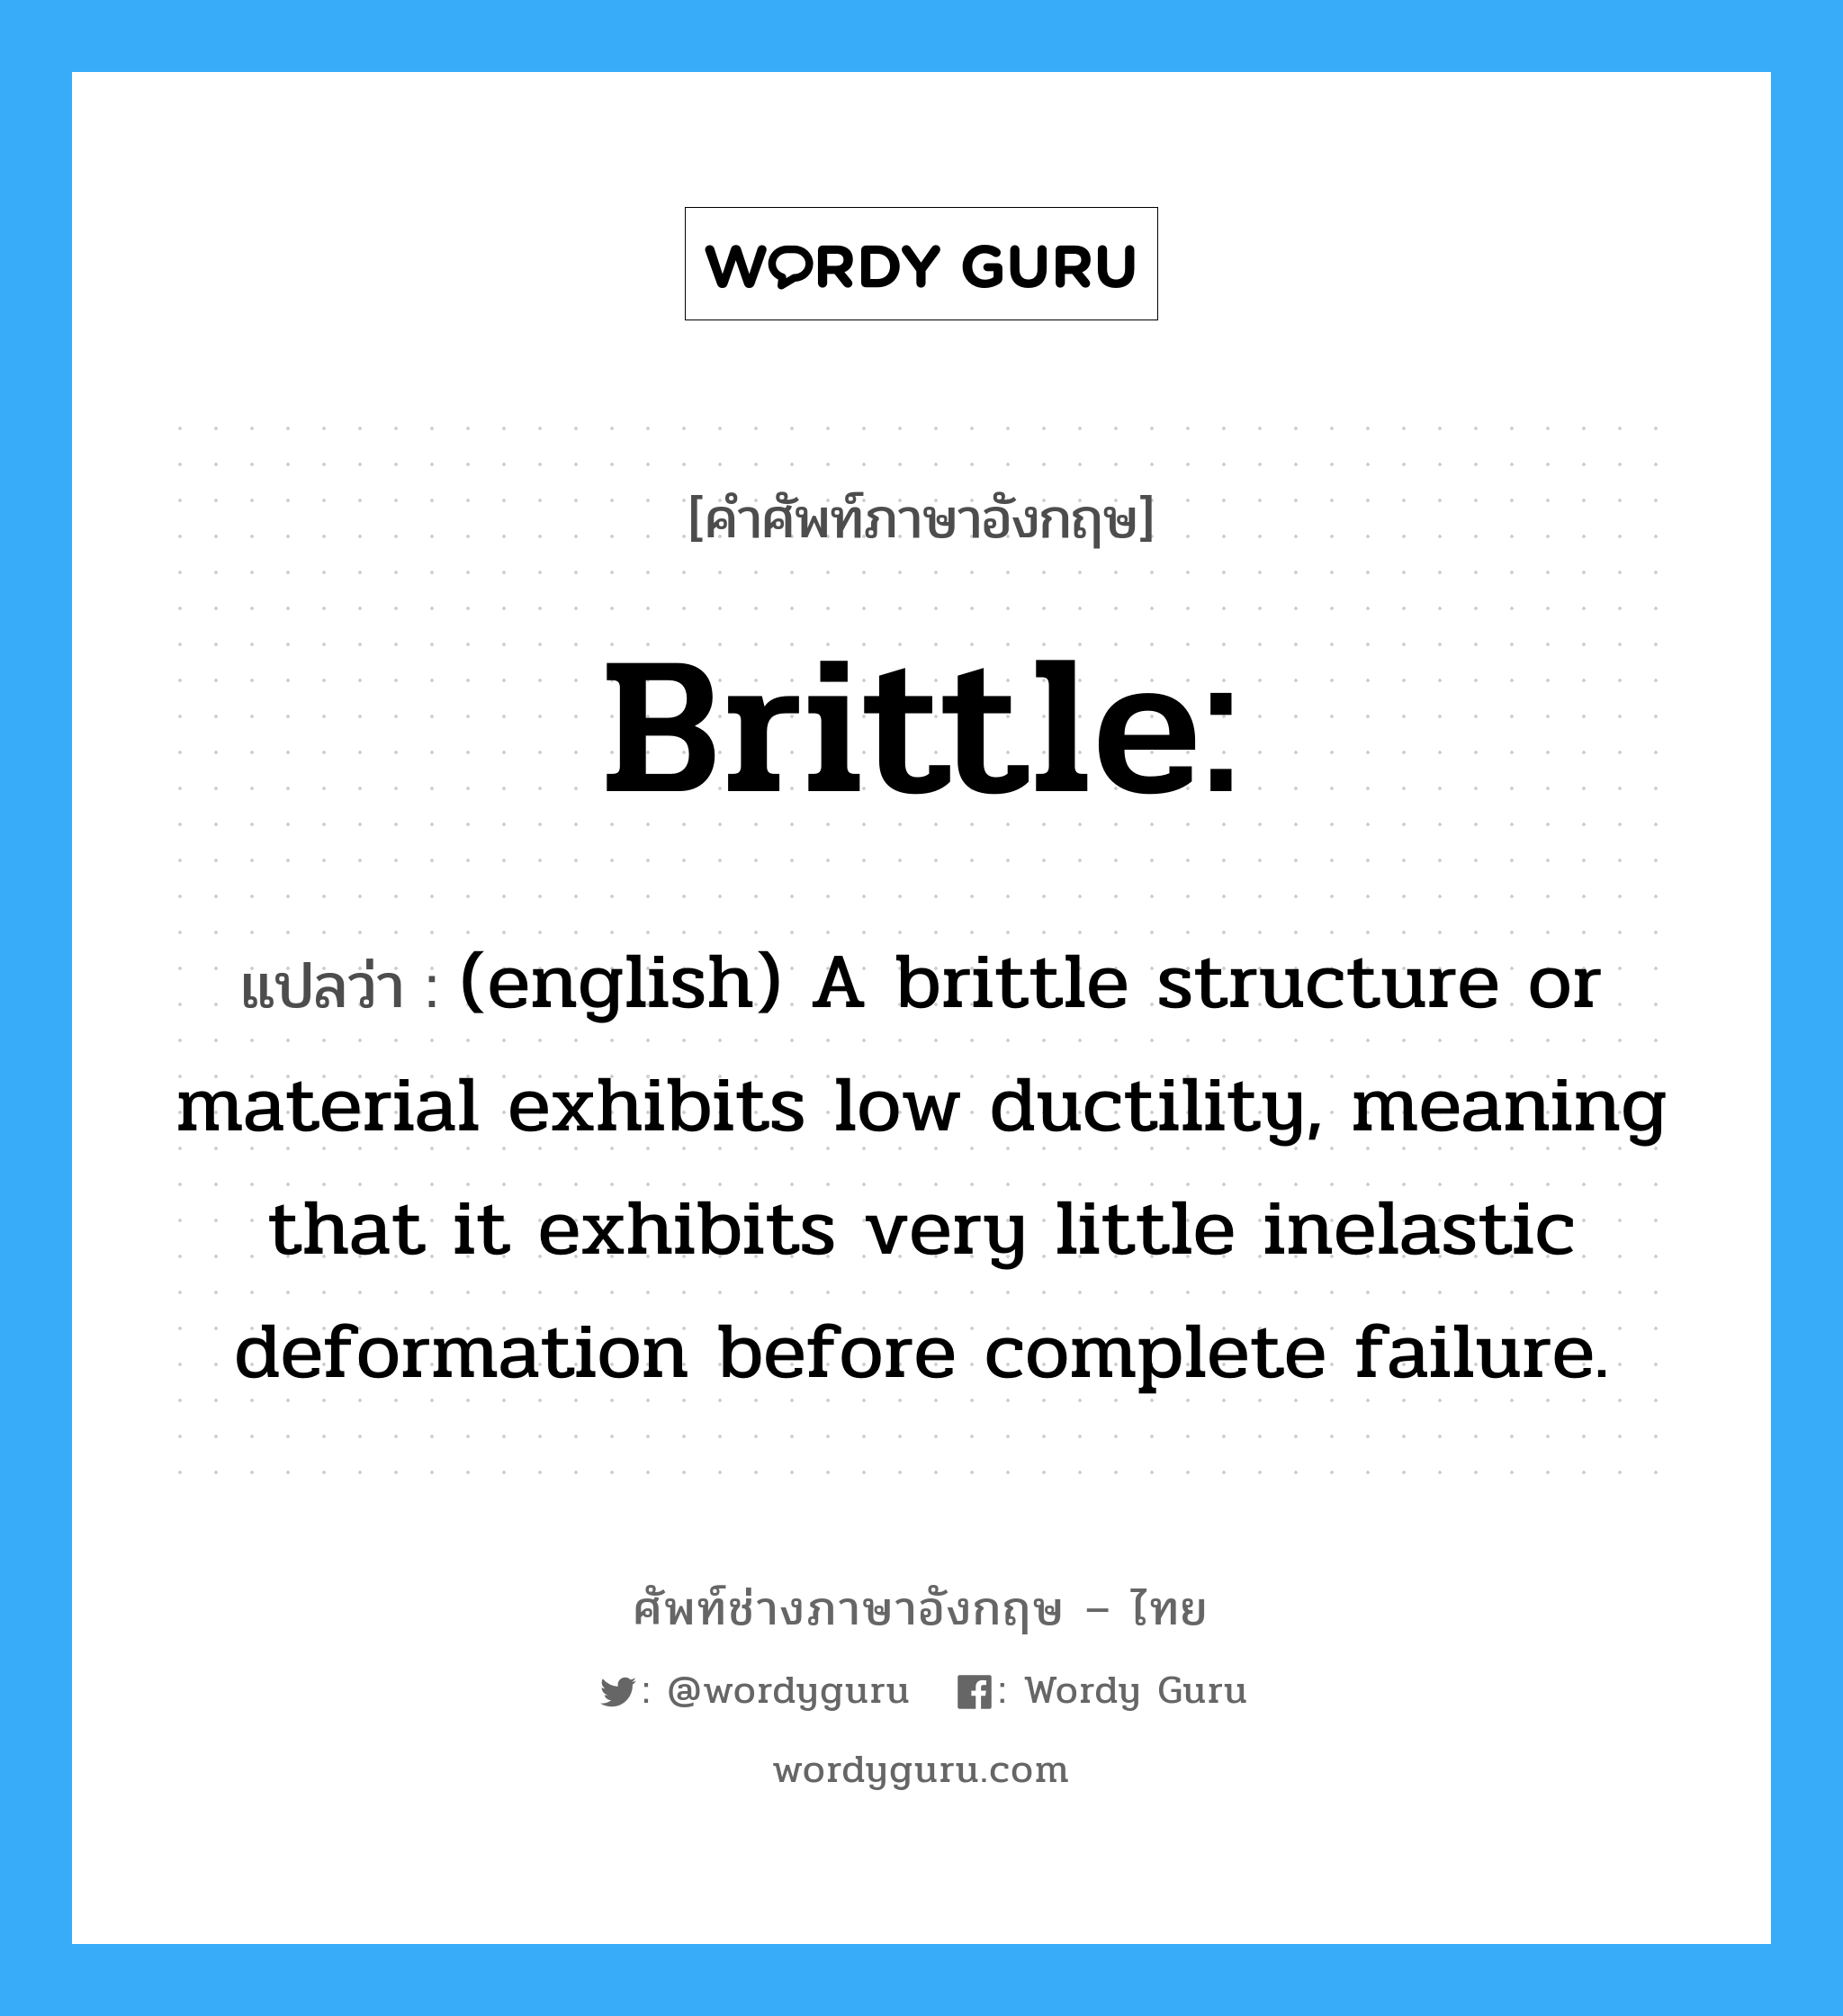 Brittle: แปลว่า?, คำศัพท์ช่างภาษาอังกฤษ - ไทย Brittle: คำศัพท์ภาษาอังกฤษ Brittle: แปลว่า (english) A brittle structure or material exhibits low ductility, meaning that it exhibits very little inelastic deformation before complete failure.